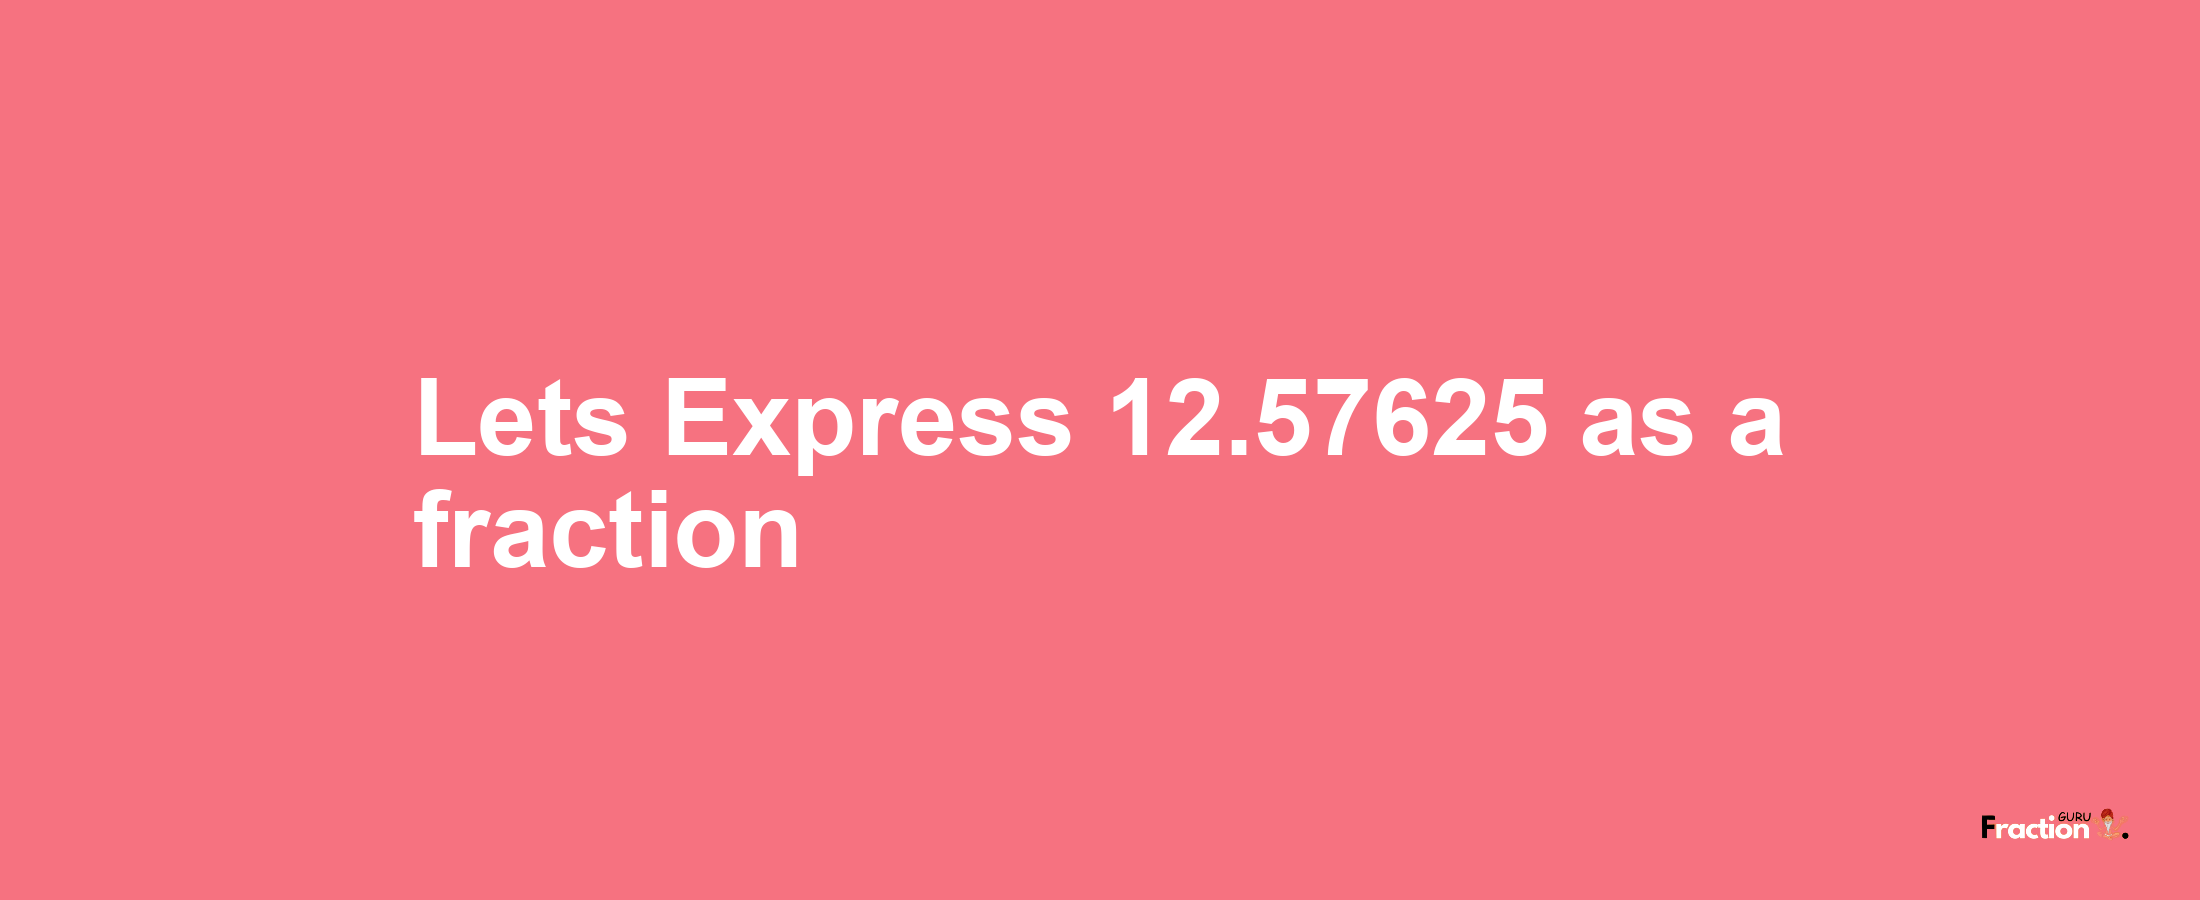 Lets Express 12.57625 as afraction